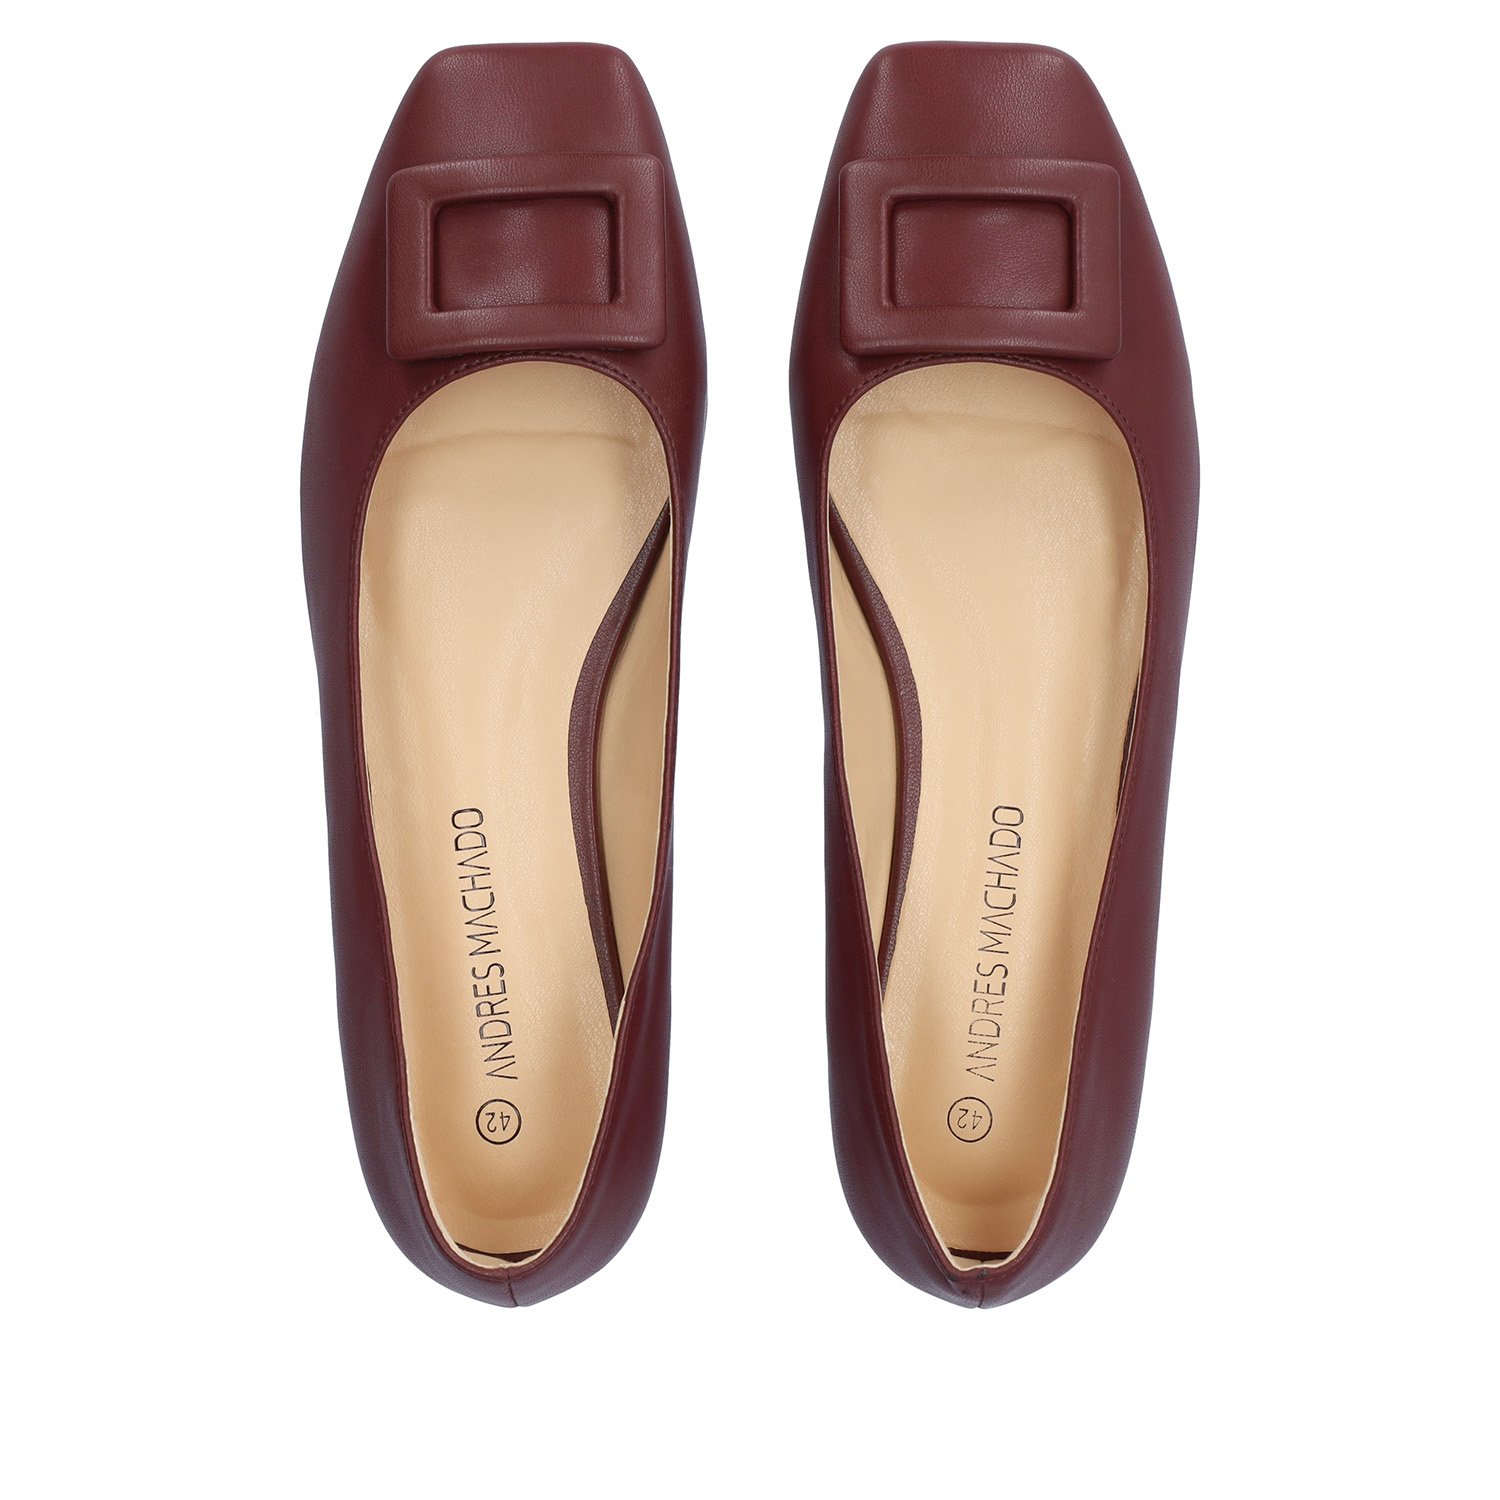 Flat ballerinas in burgundy faux leather 